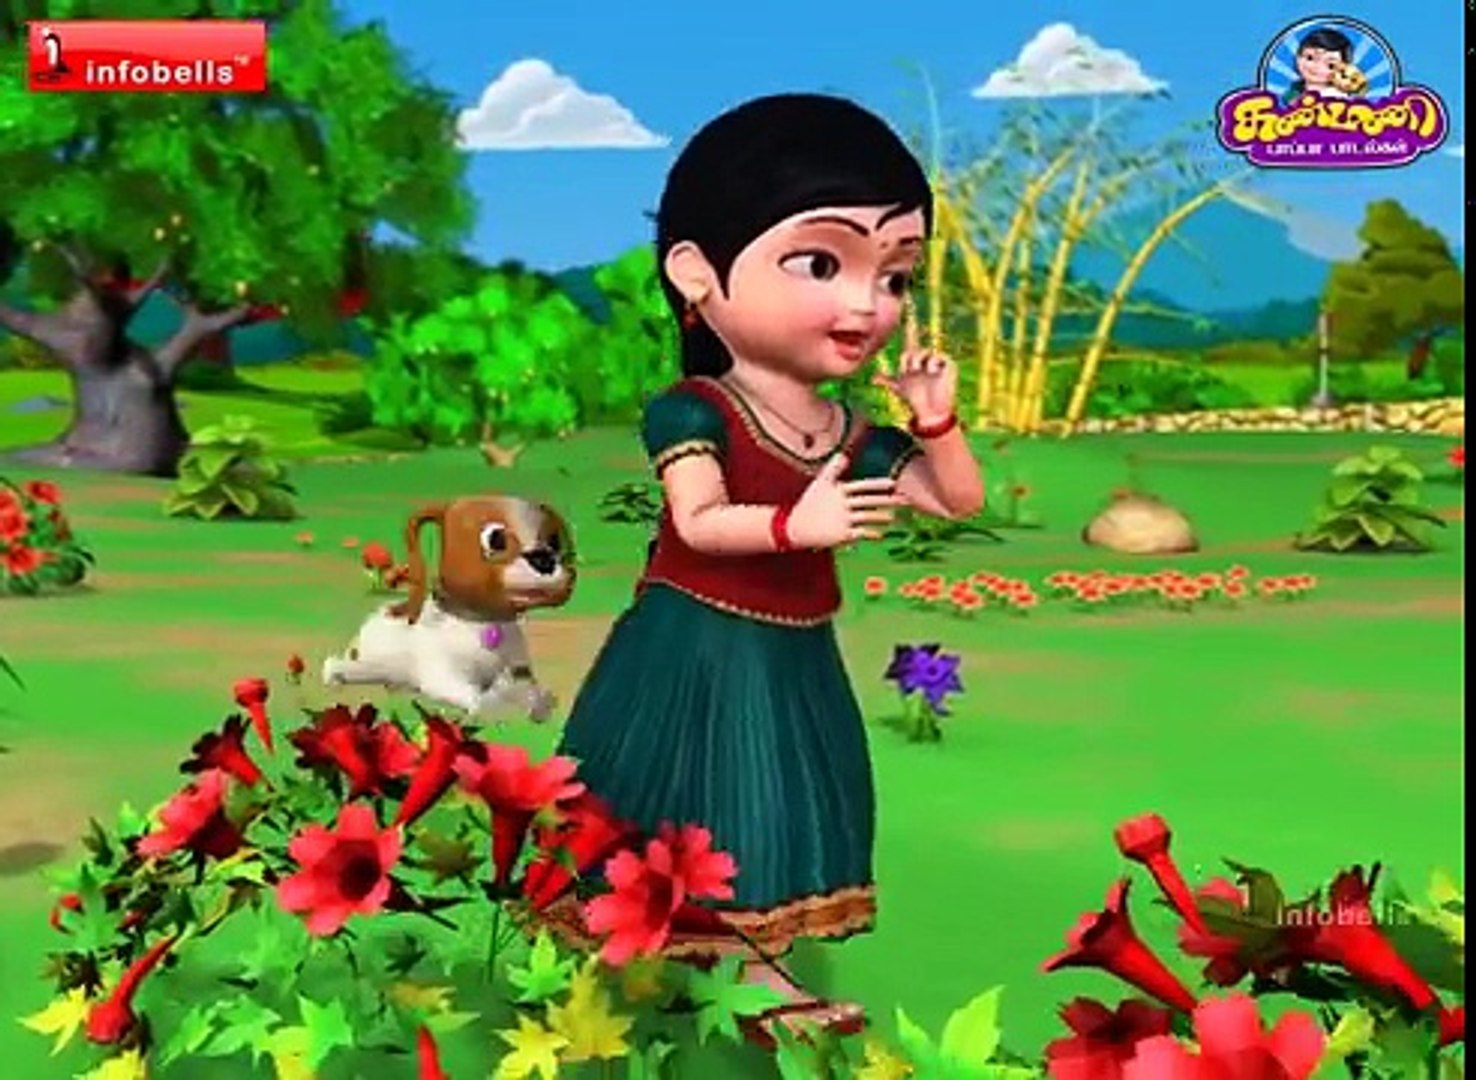 Top 25 Tamil Rhymes for Children Infobells - video Dailymotion